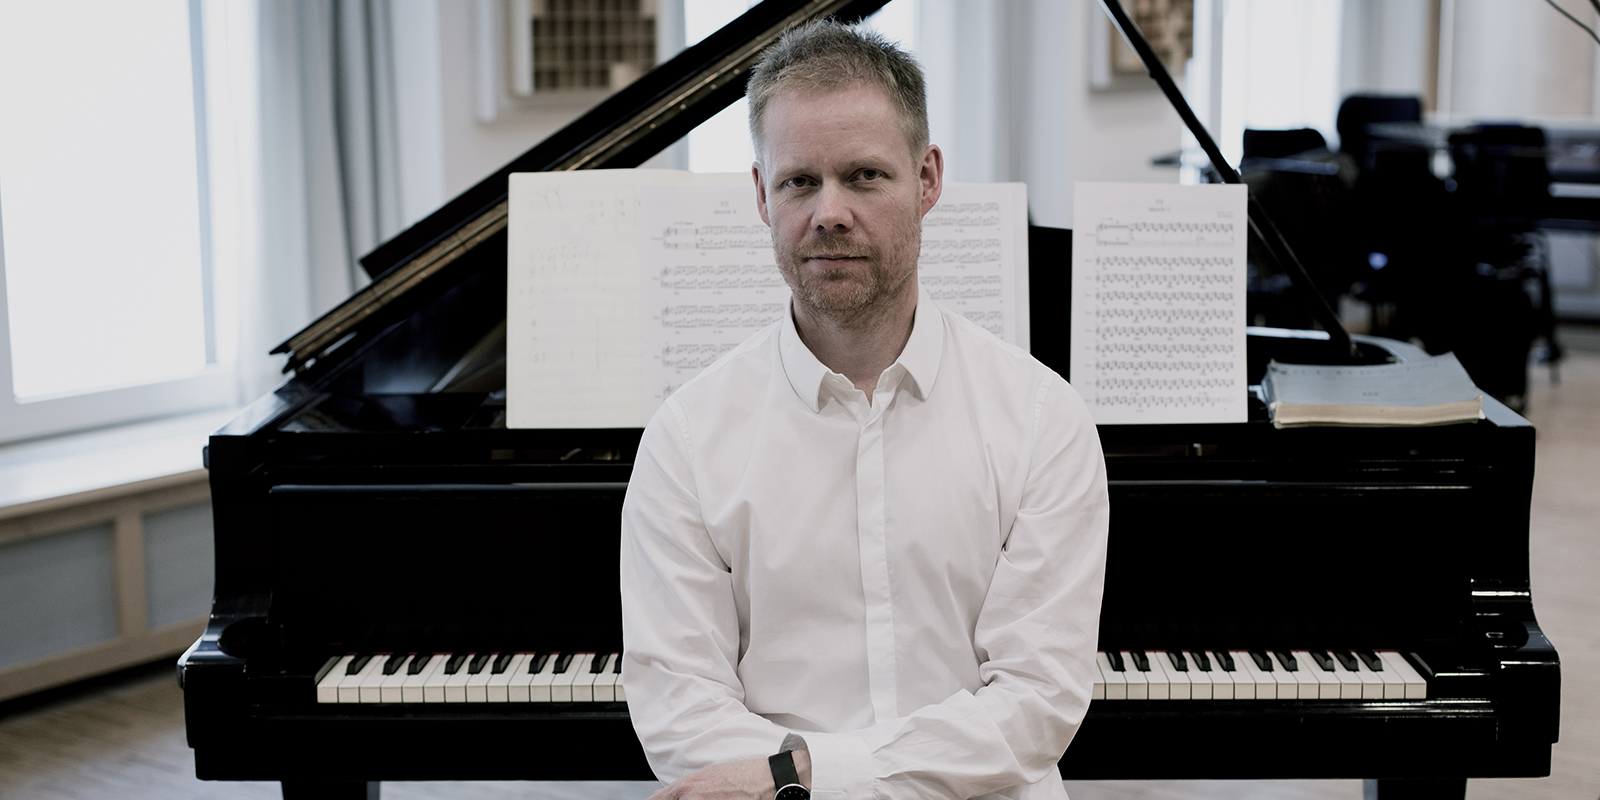 Electro-acoustic musician Max Richter coming to Athens